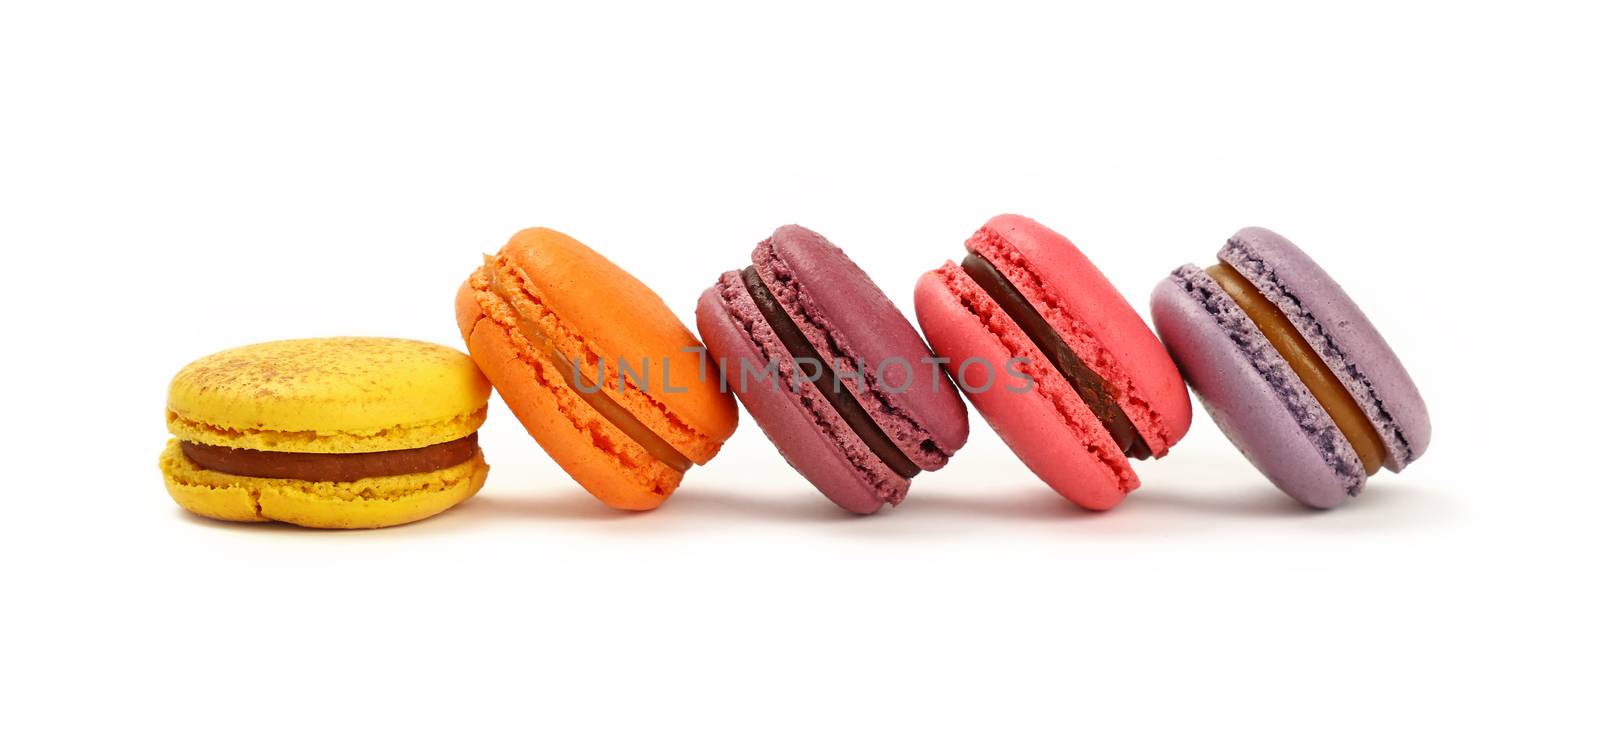 Row of several fresh colorful traditional French macaroon pastry cookies (macarons, macaroni) isolated on white background, close up, low angle view